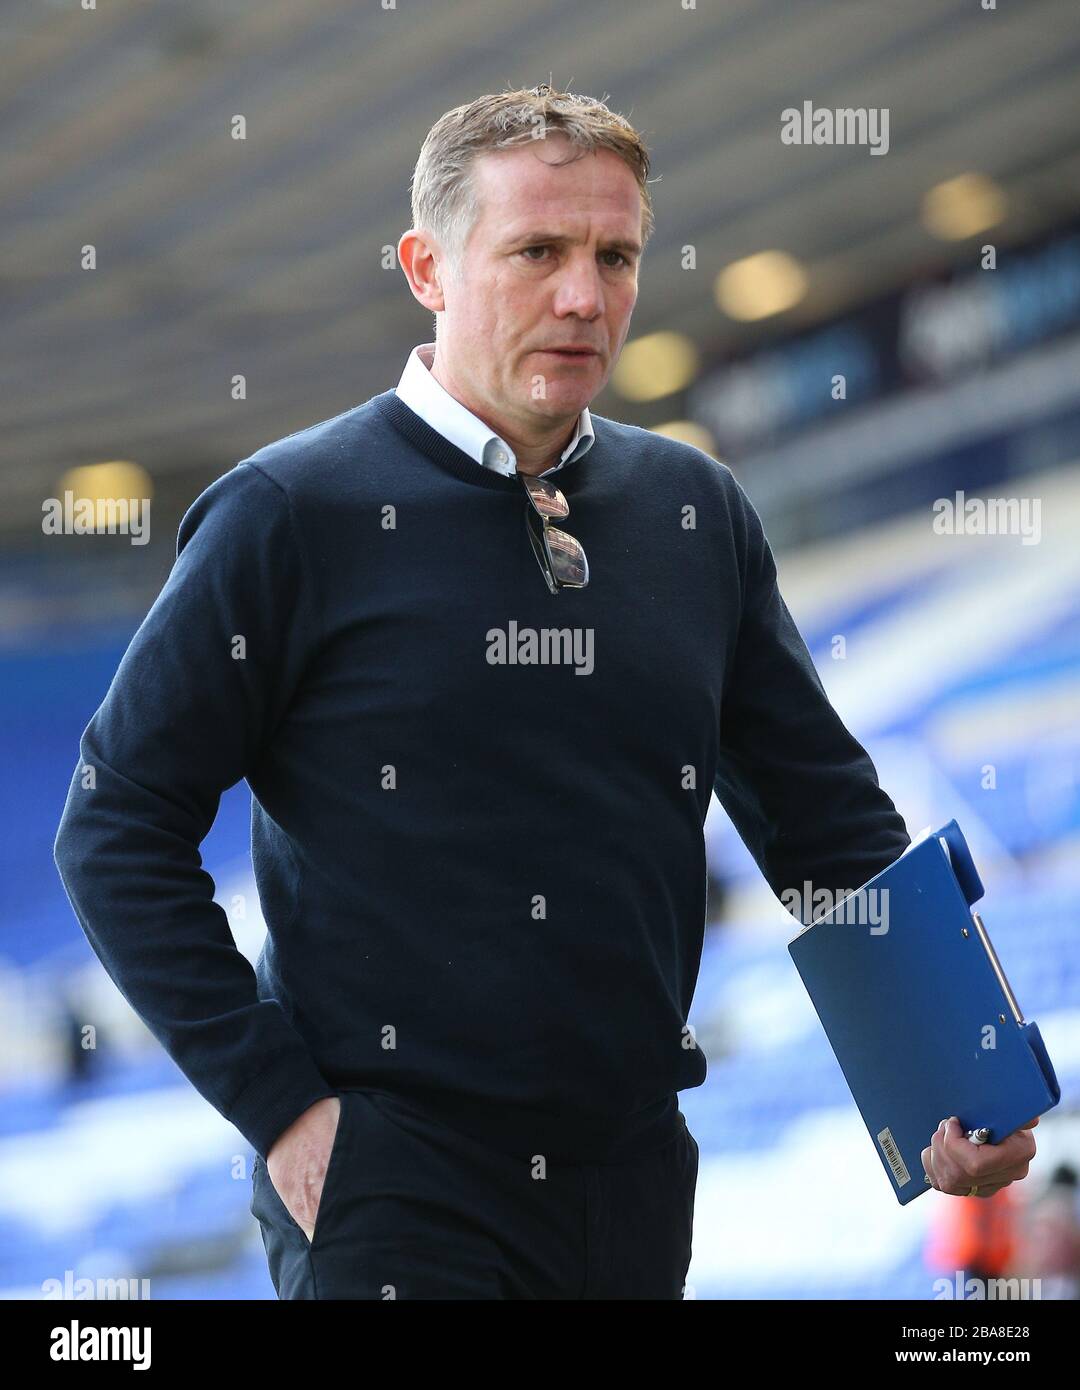 Sunderland's manager Phil Parkinson ahead of the match Stock Photo